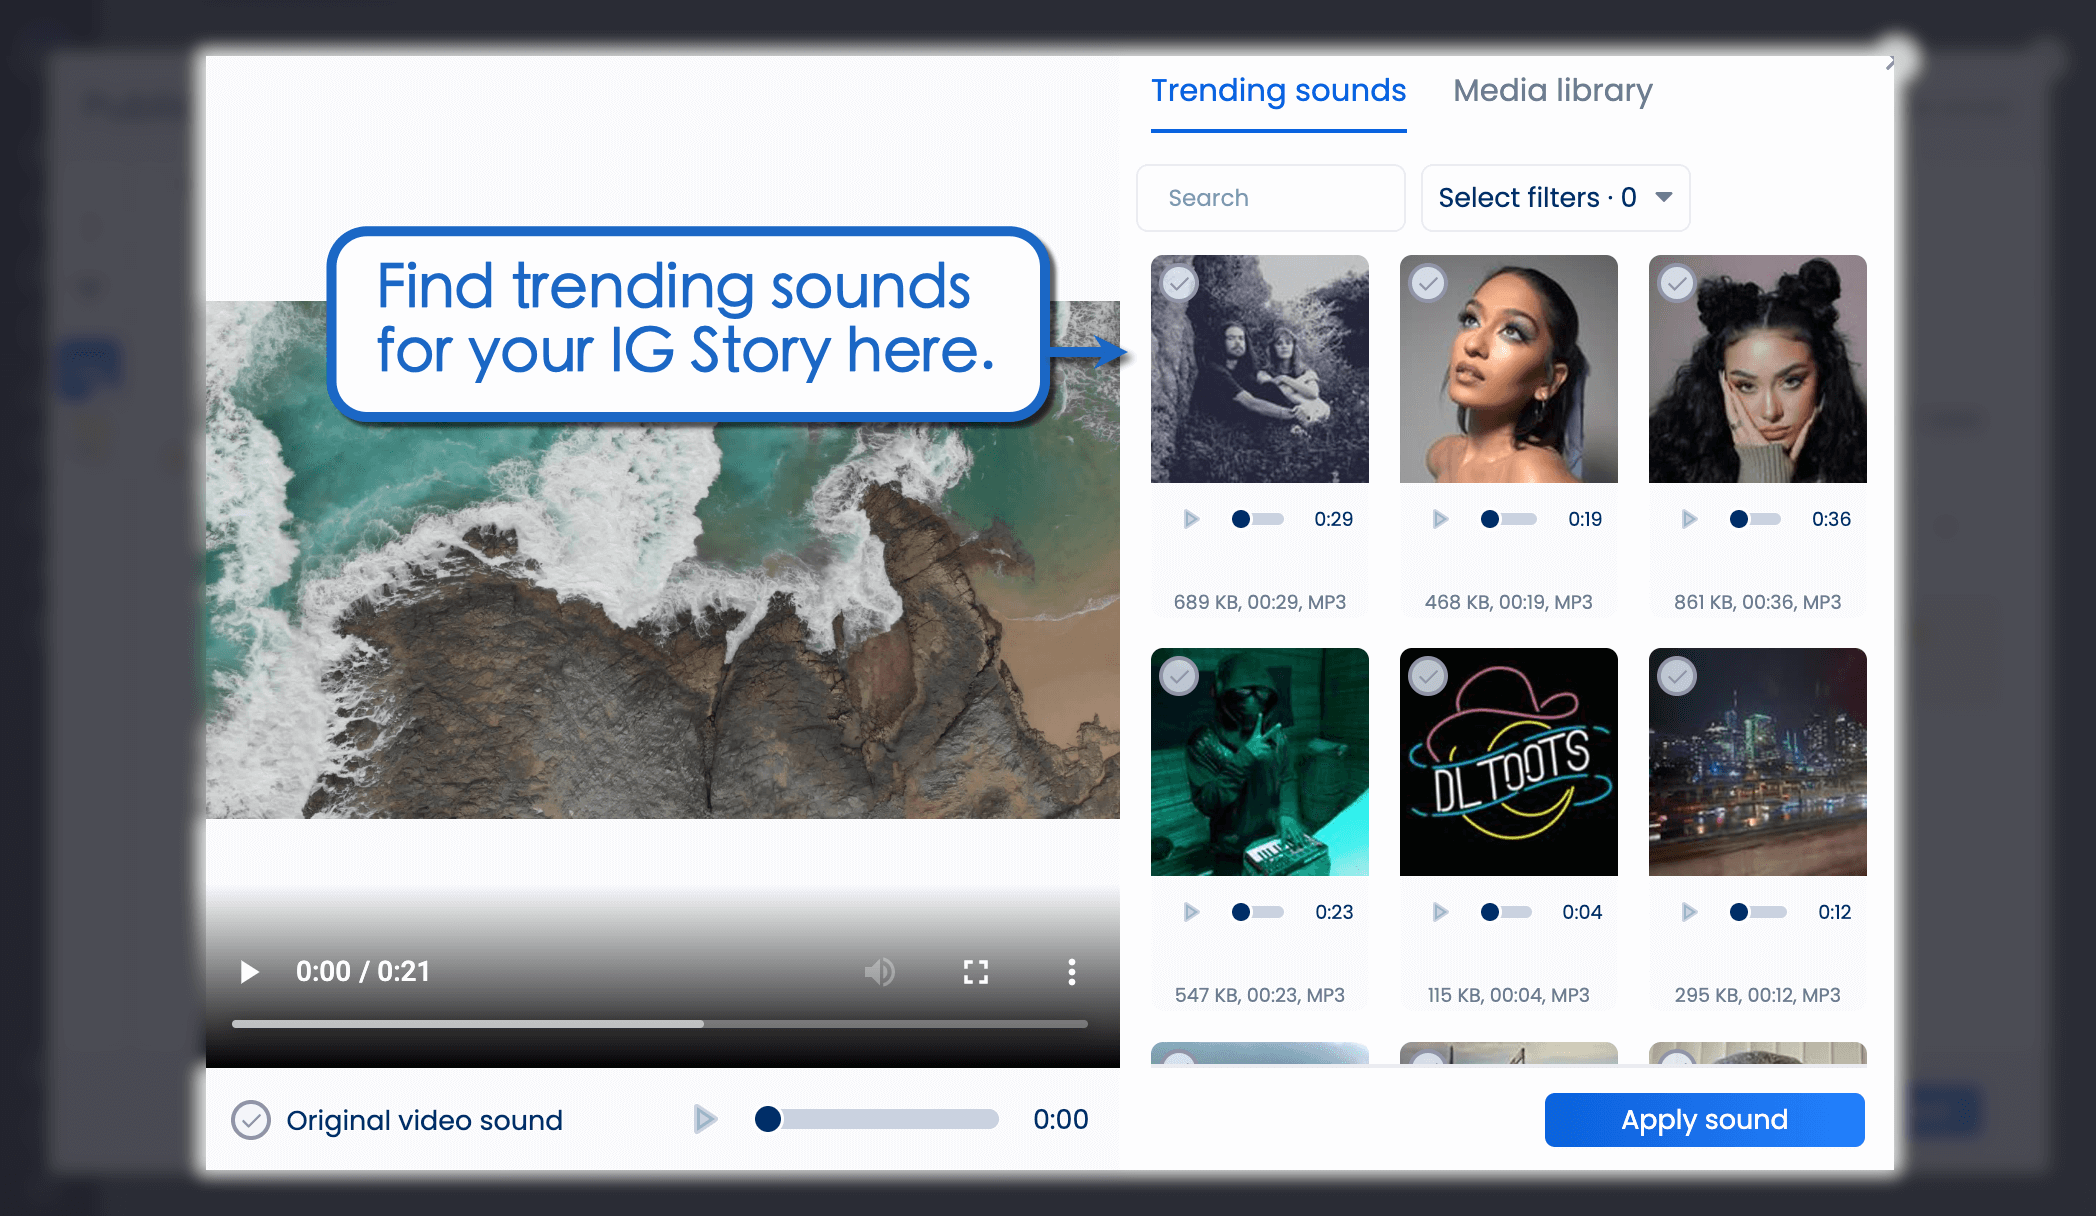 Trending sound suggestions in Vista Social.